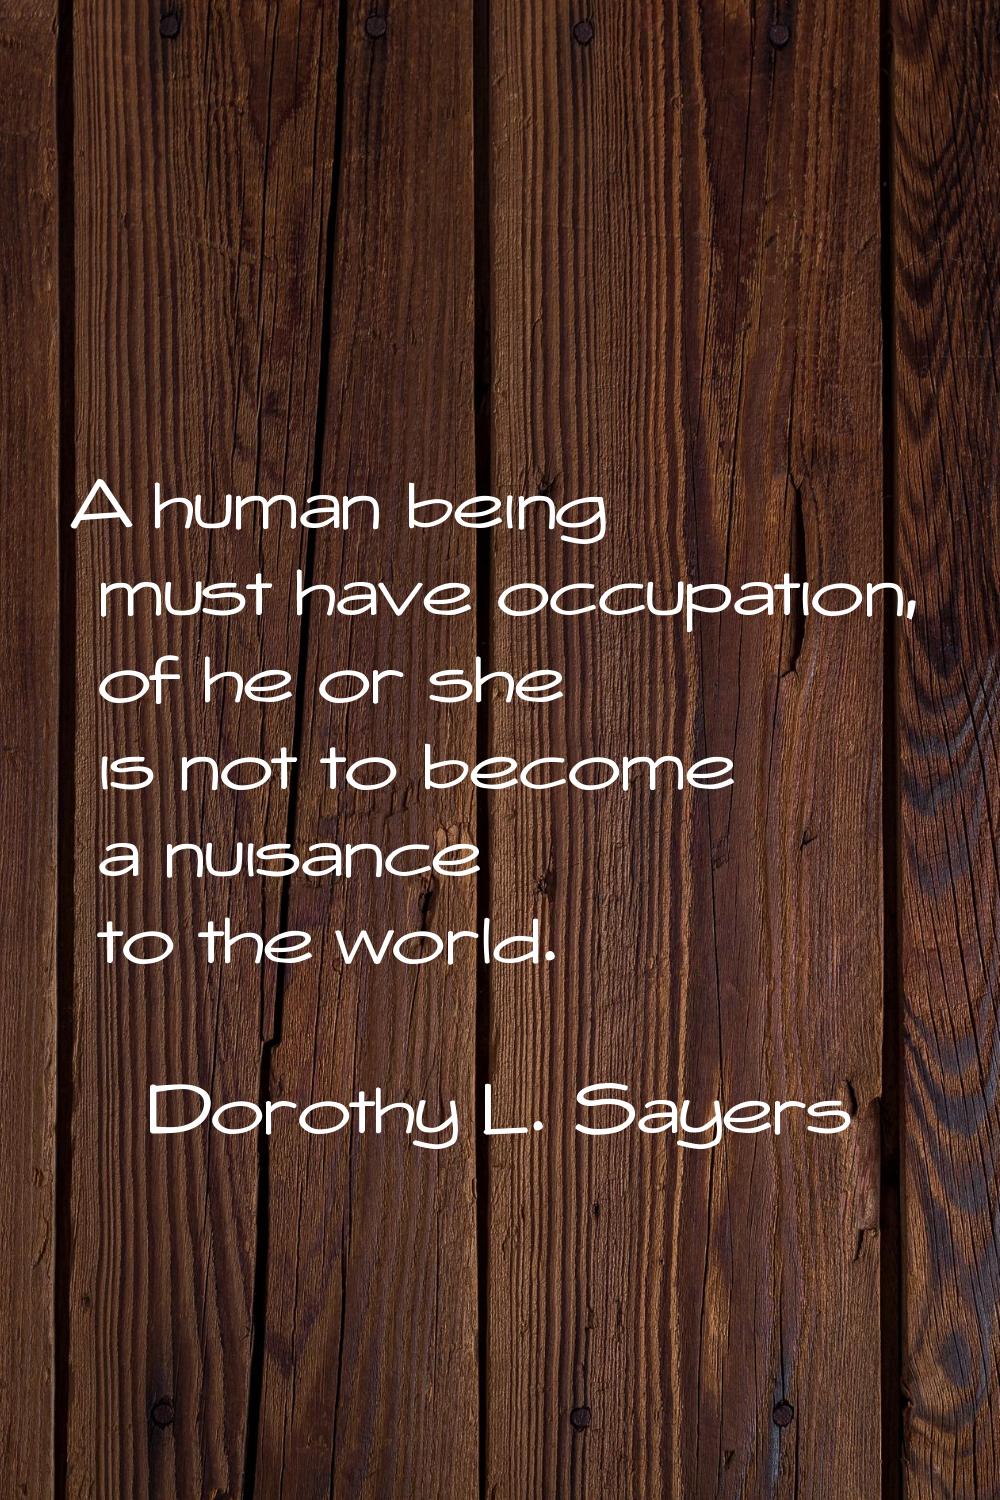 A human being must have occupation, of he or she is not to become a nuisance to the world.